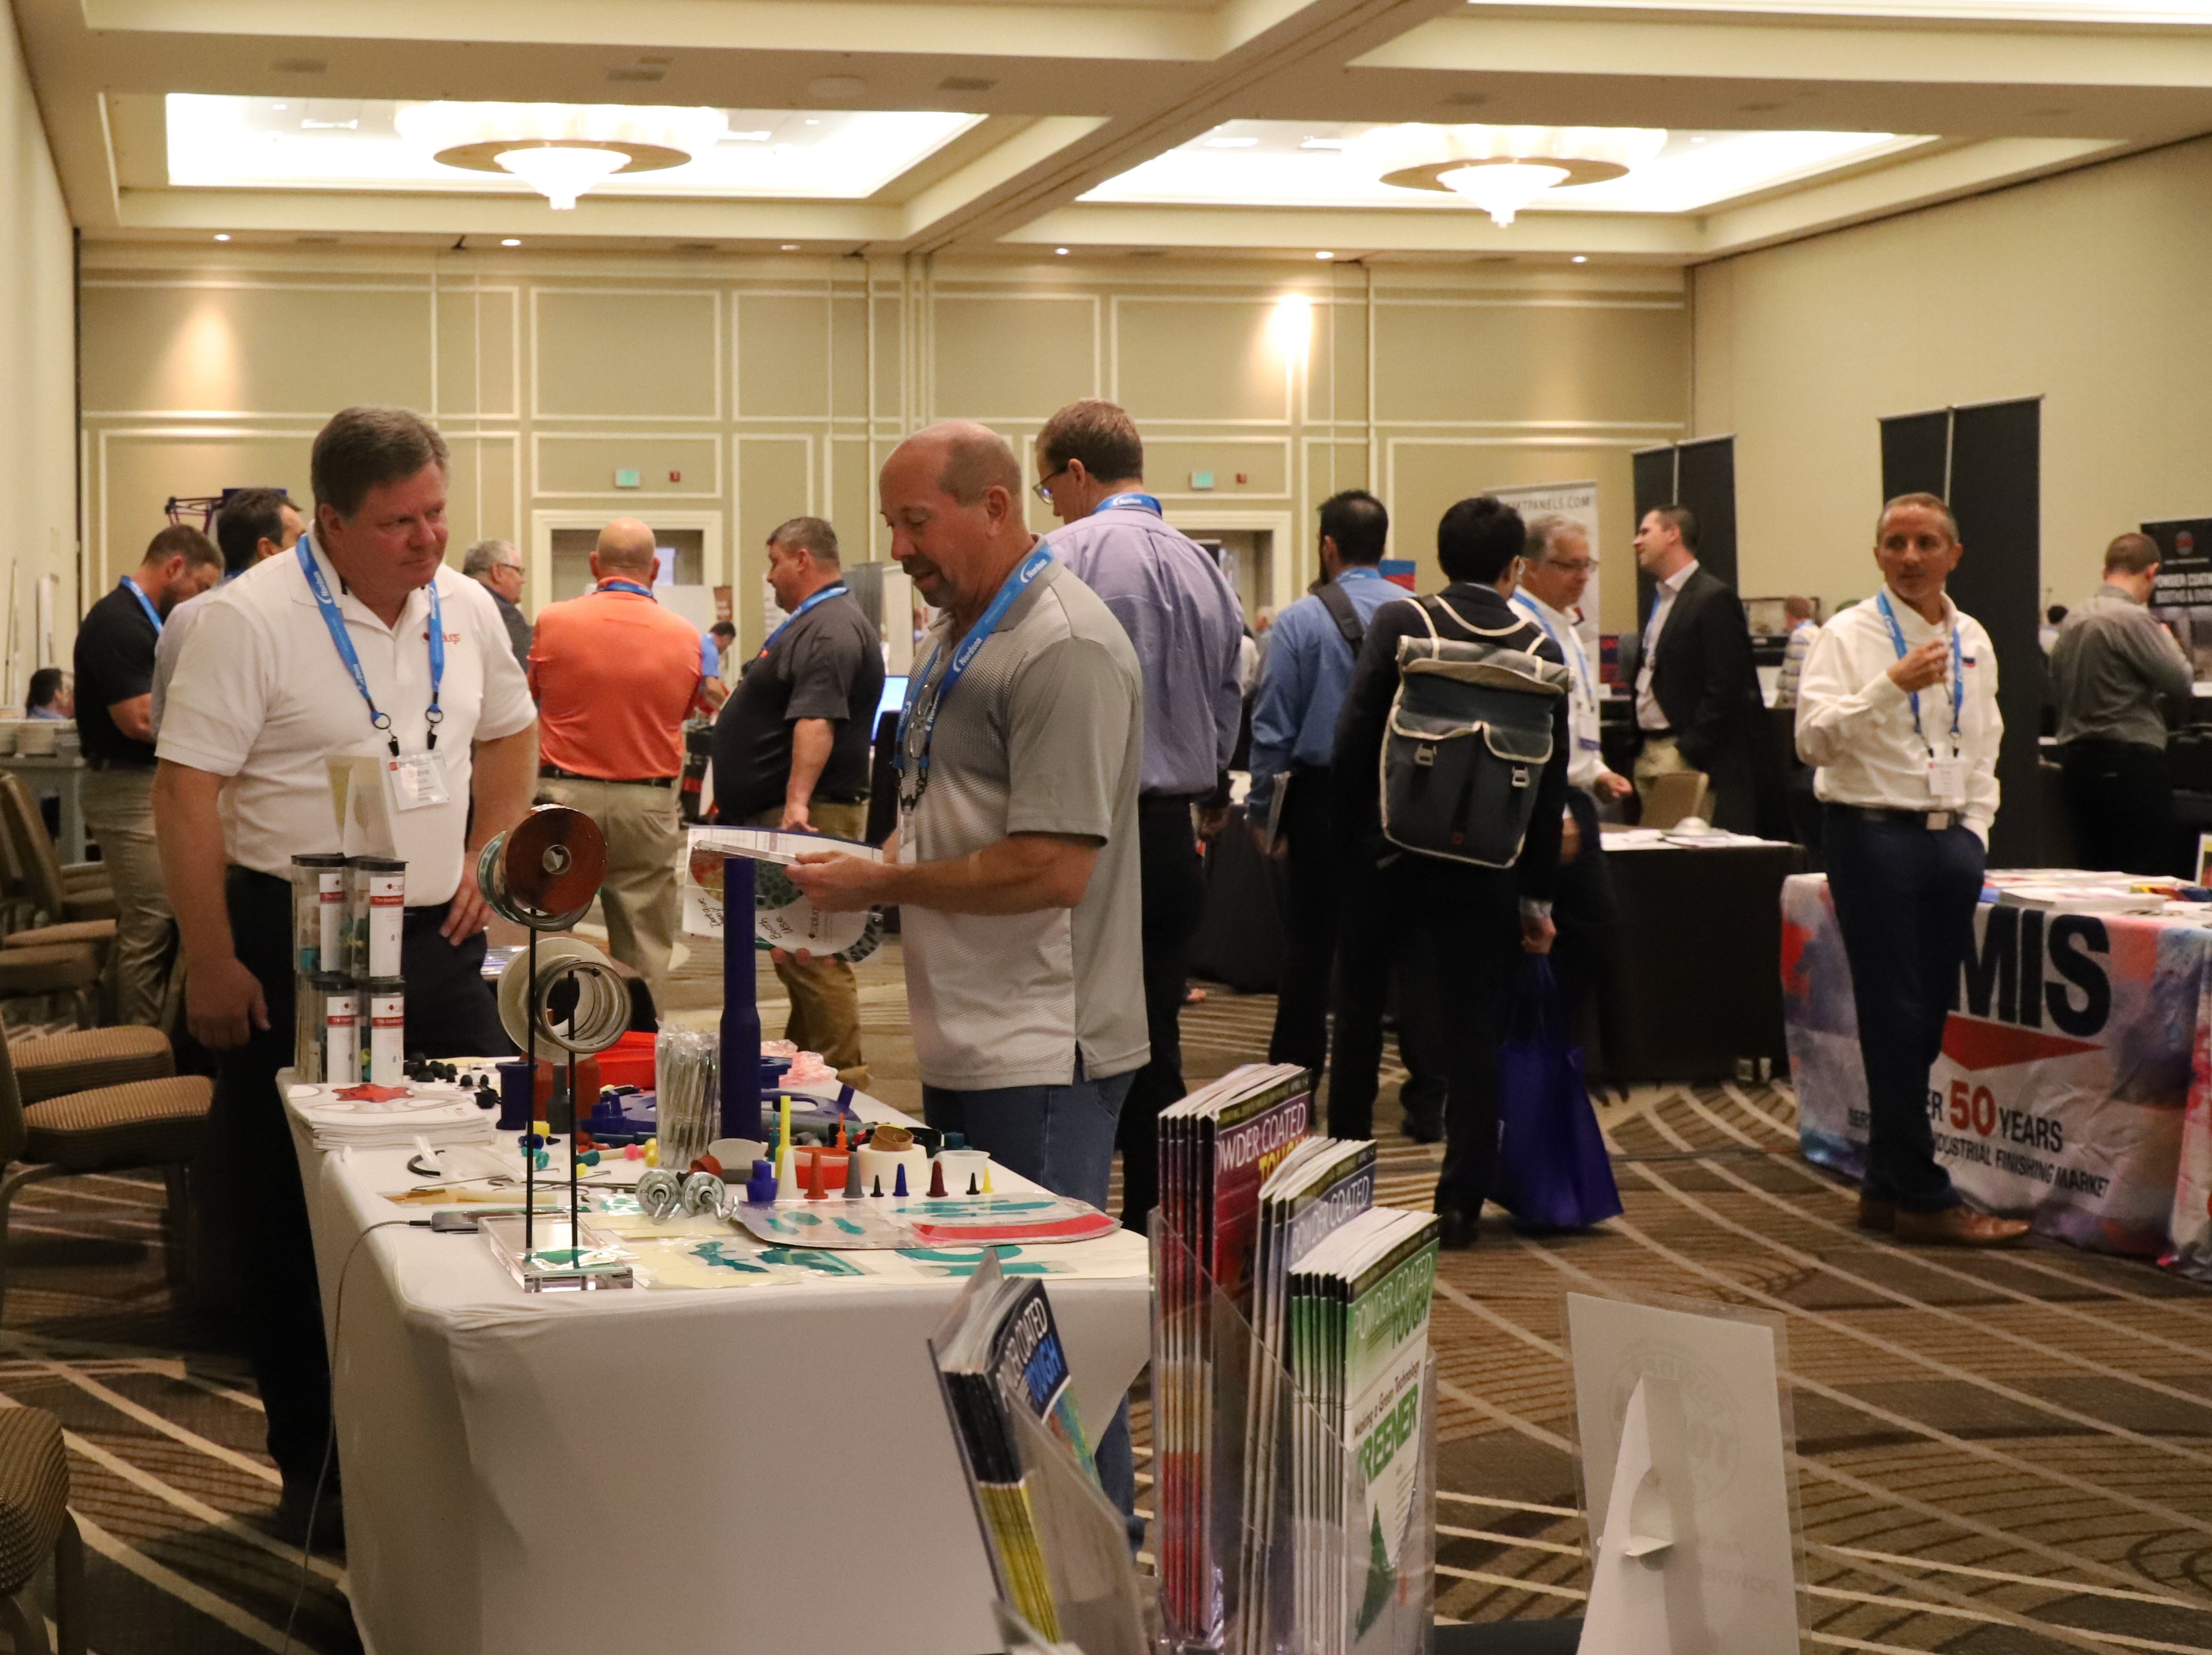 The PCI's Tabletop Exhibition offers the opportunity to meet with suppliers face-to-face.